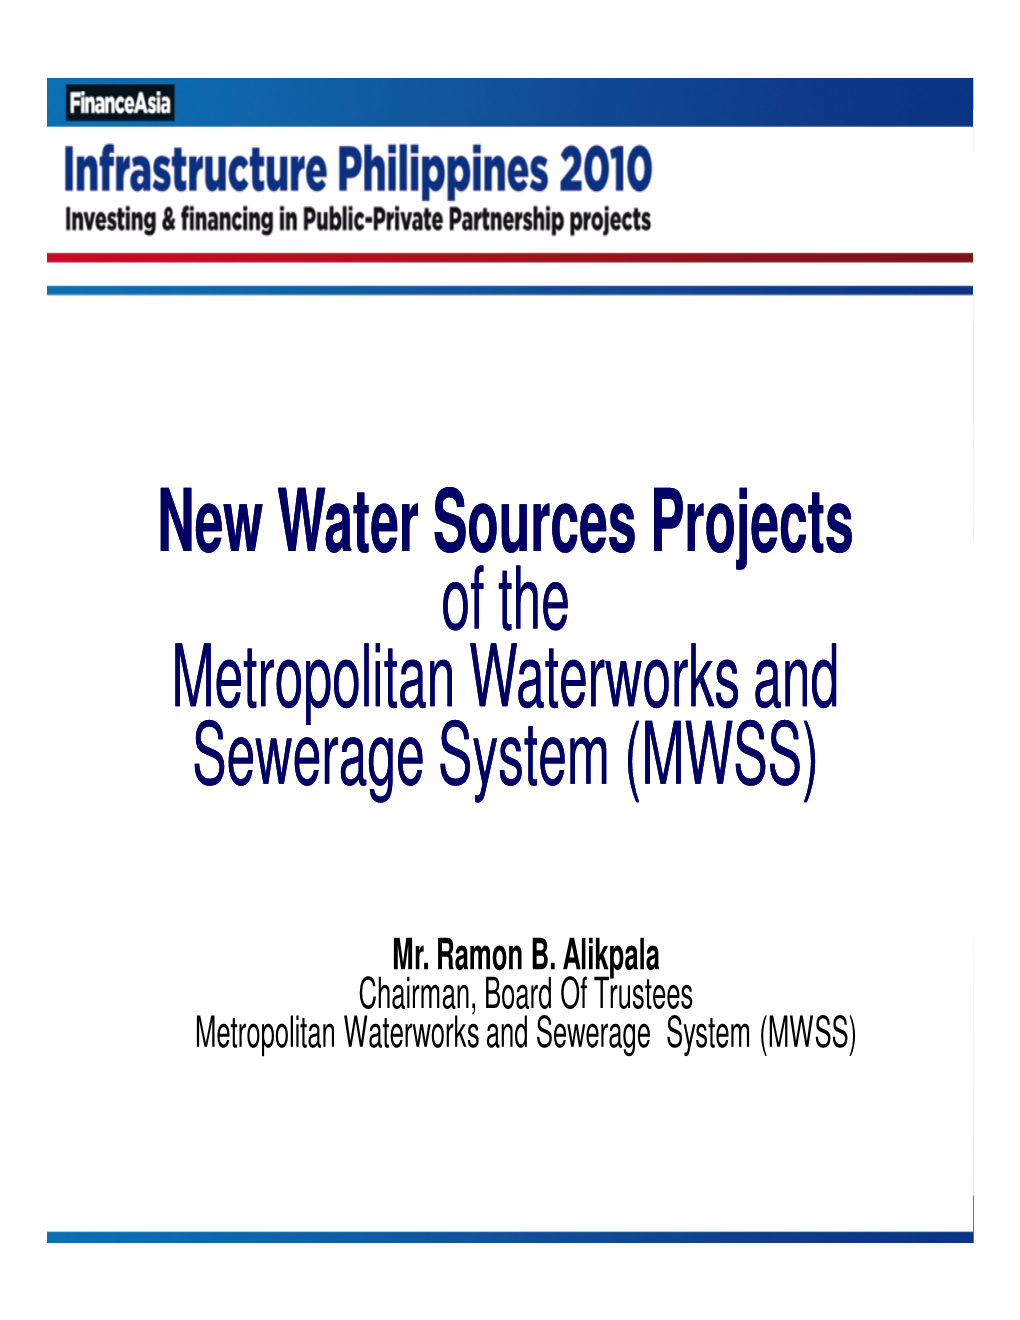 New Water Sources Projects of the Metropolitan Waterworks and Sewerage System (MWSS)